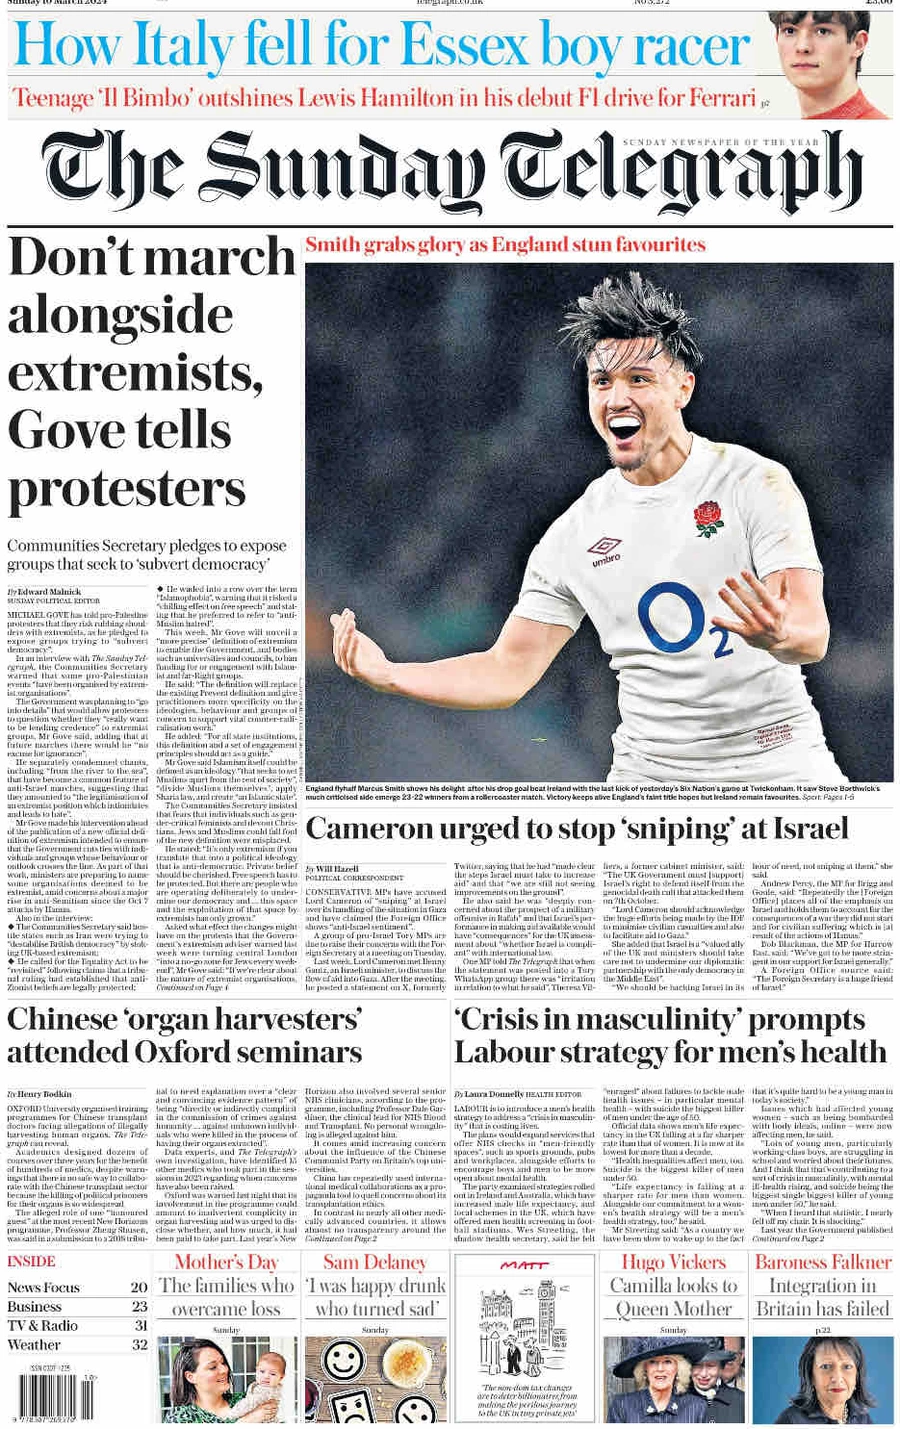 The Sunday Telegraph – Don’t march alongside extremists, Gove tells protesters